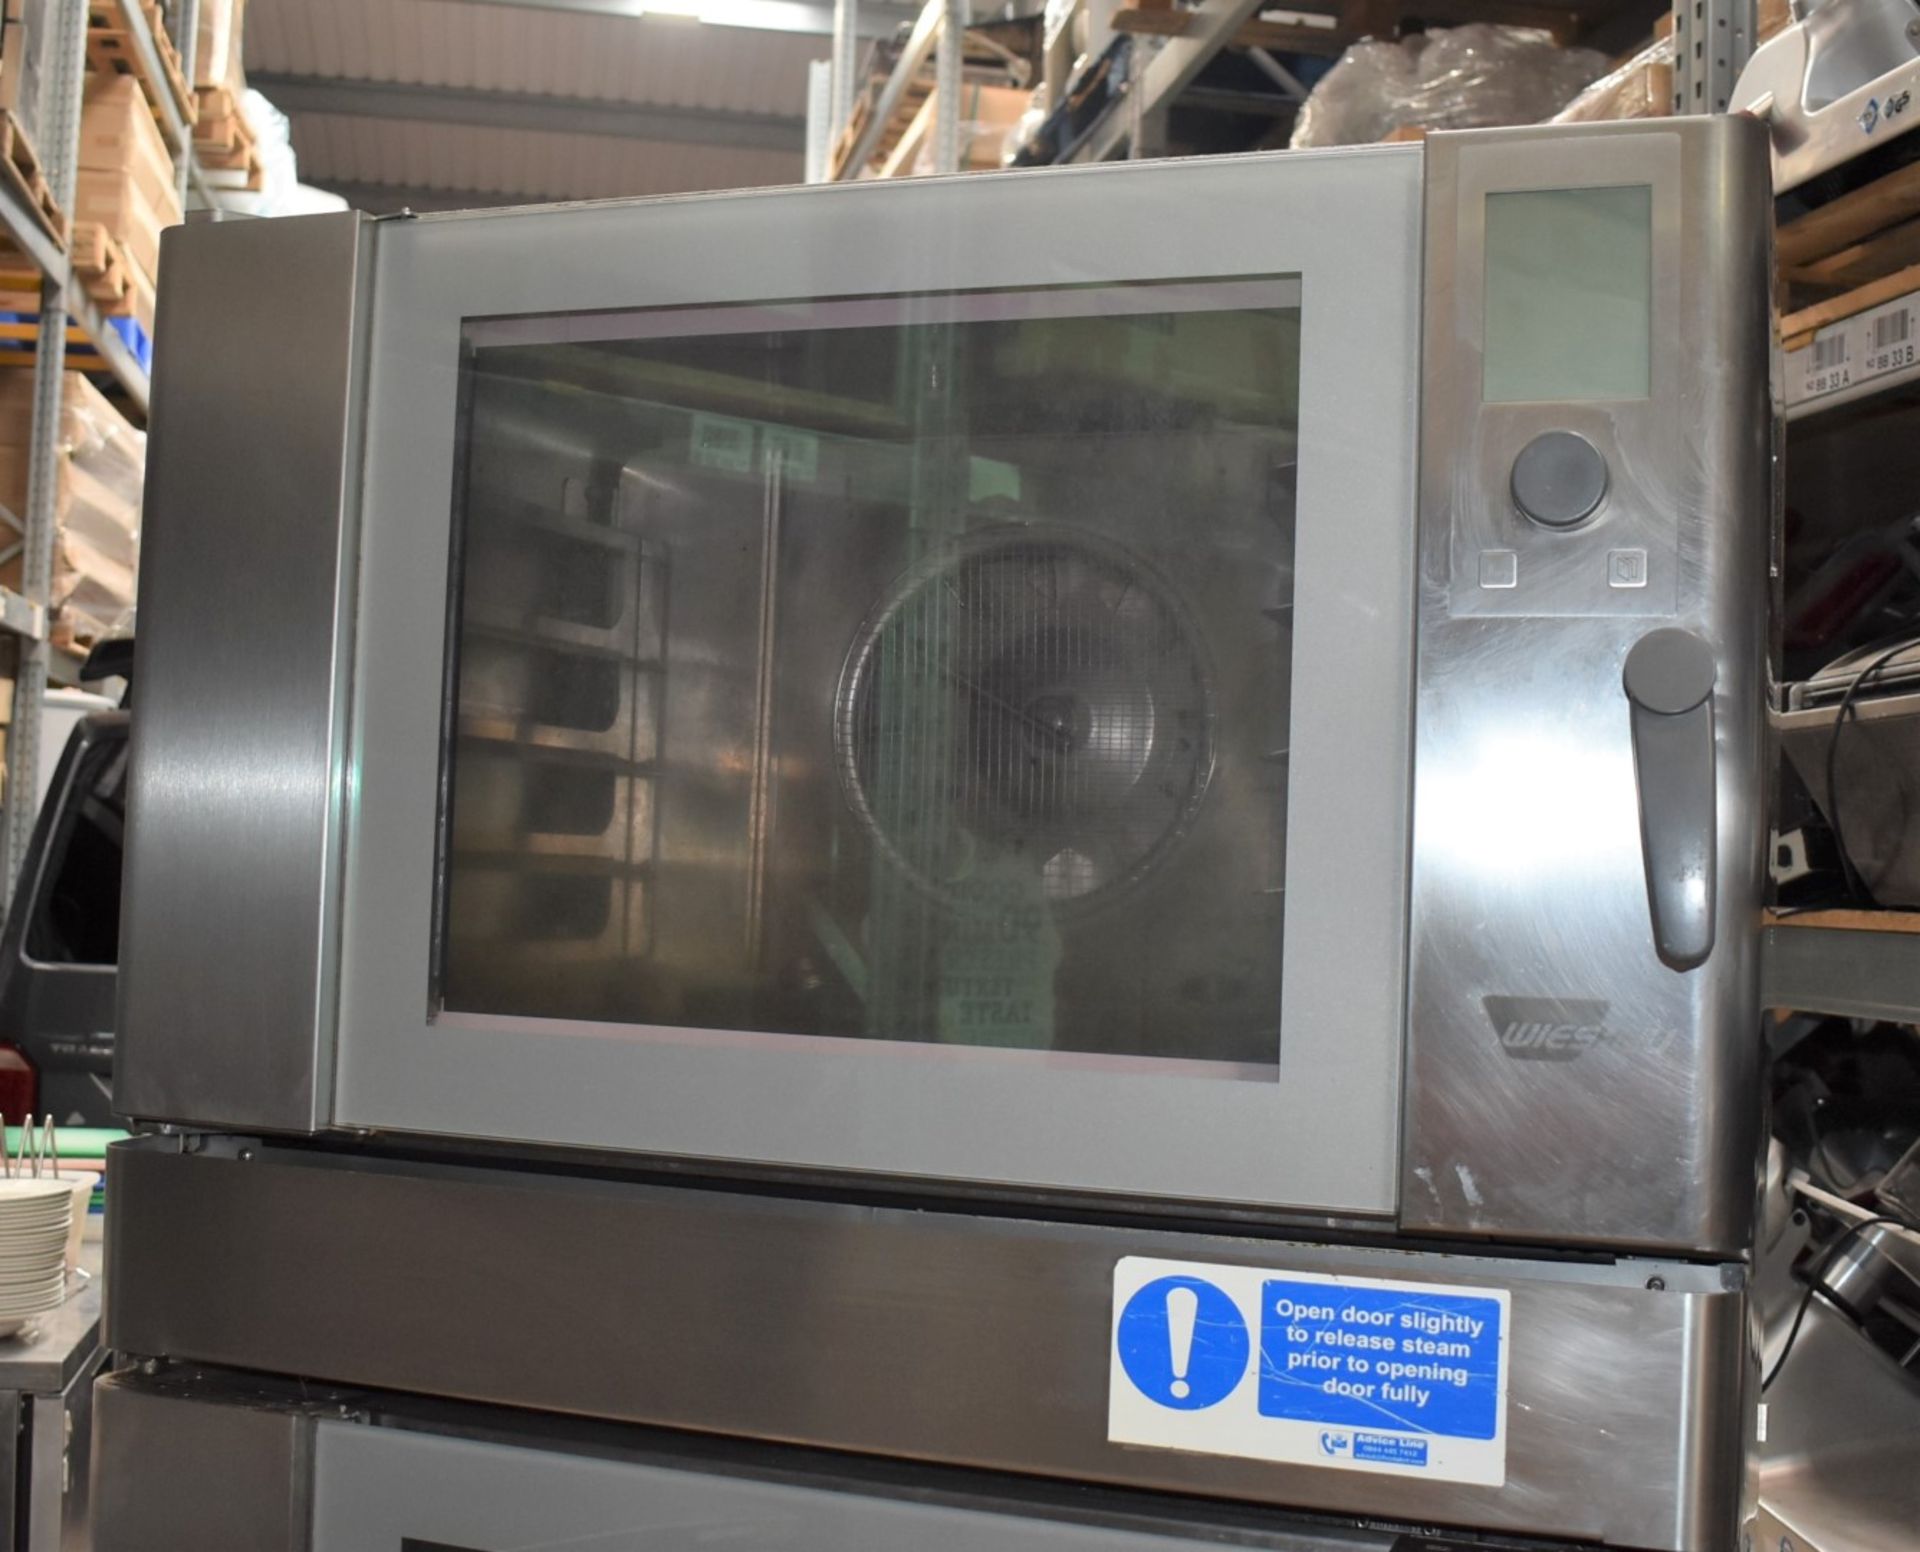 1 x Wiesheu B4-E2 Duo Commercial Convection Oven With Stainless Steel Exterior - Image 6 of 12